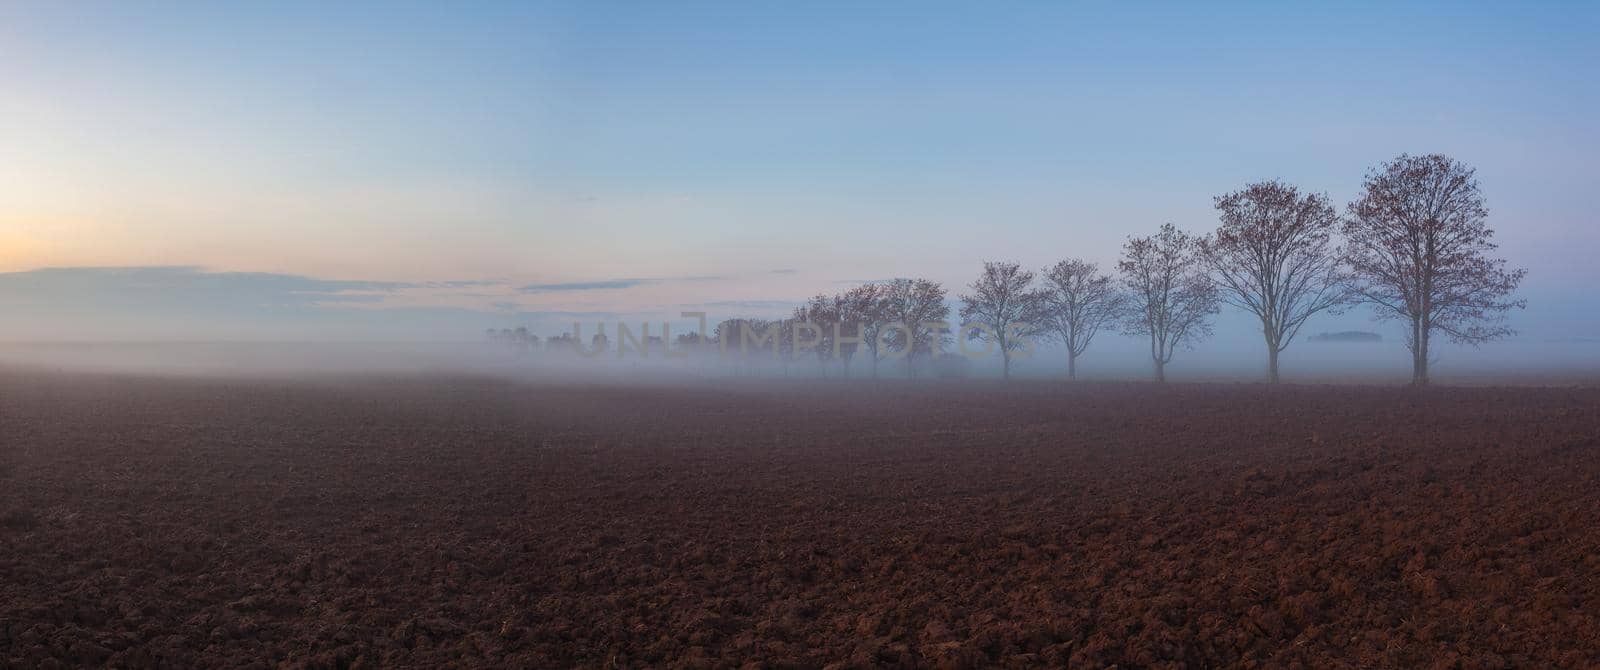 Landscape covered with fog in Central Bohemian Uplands, Czech Republic. Misty morning between fields.